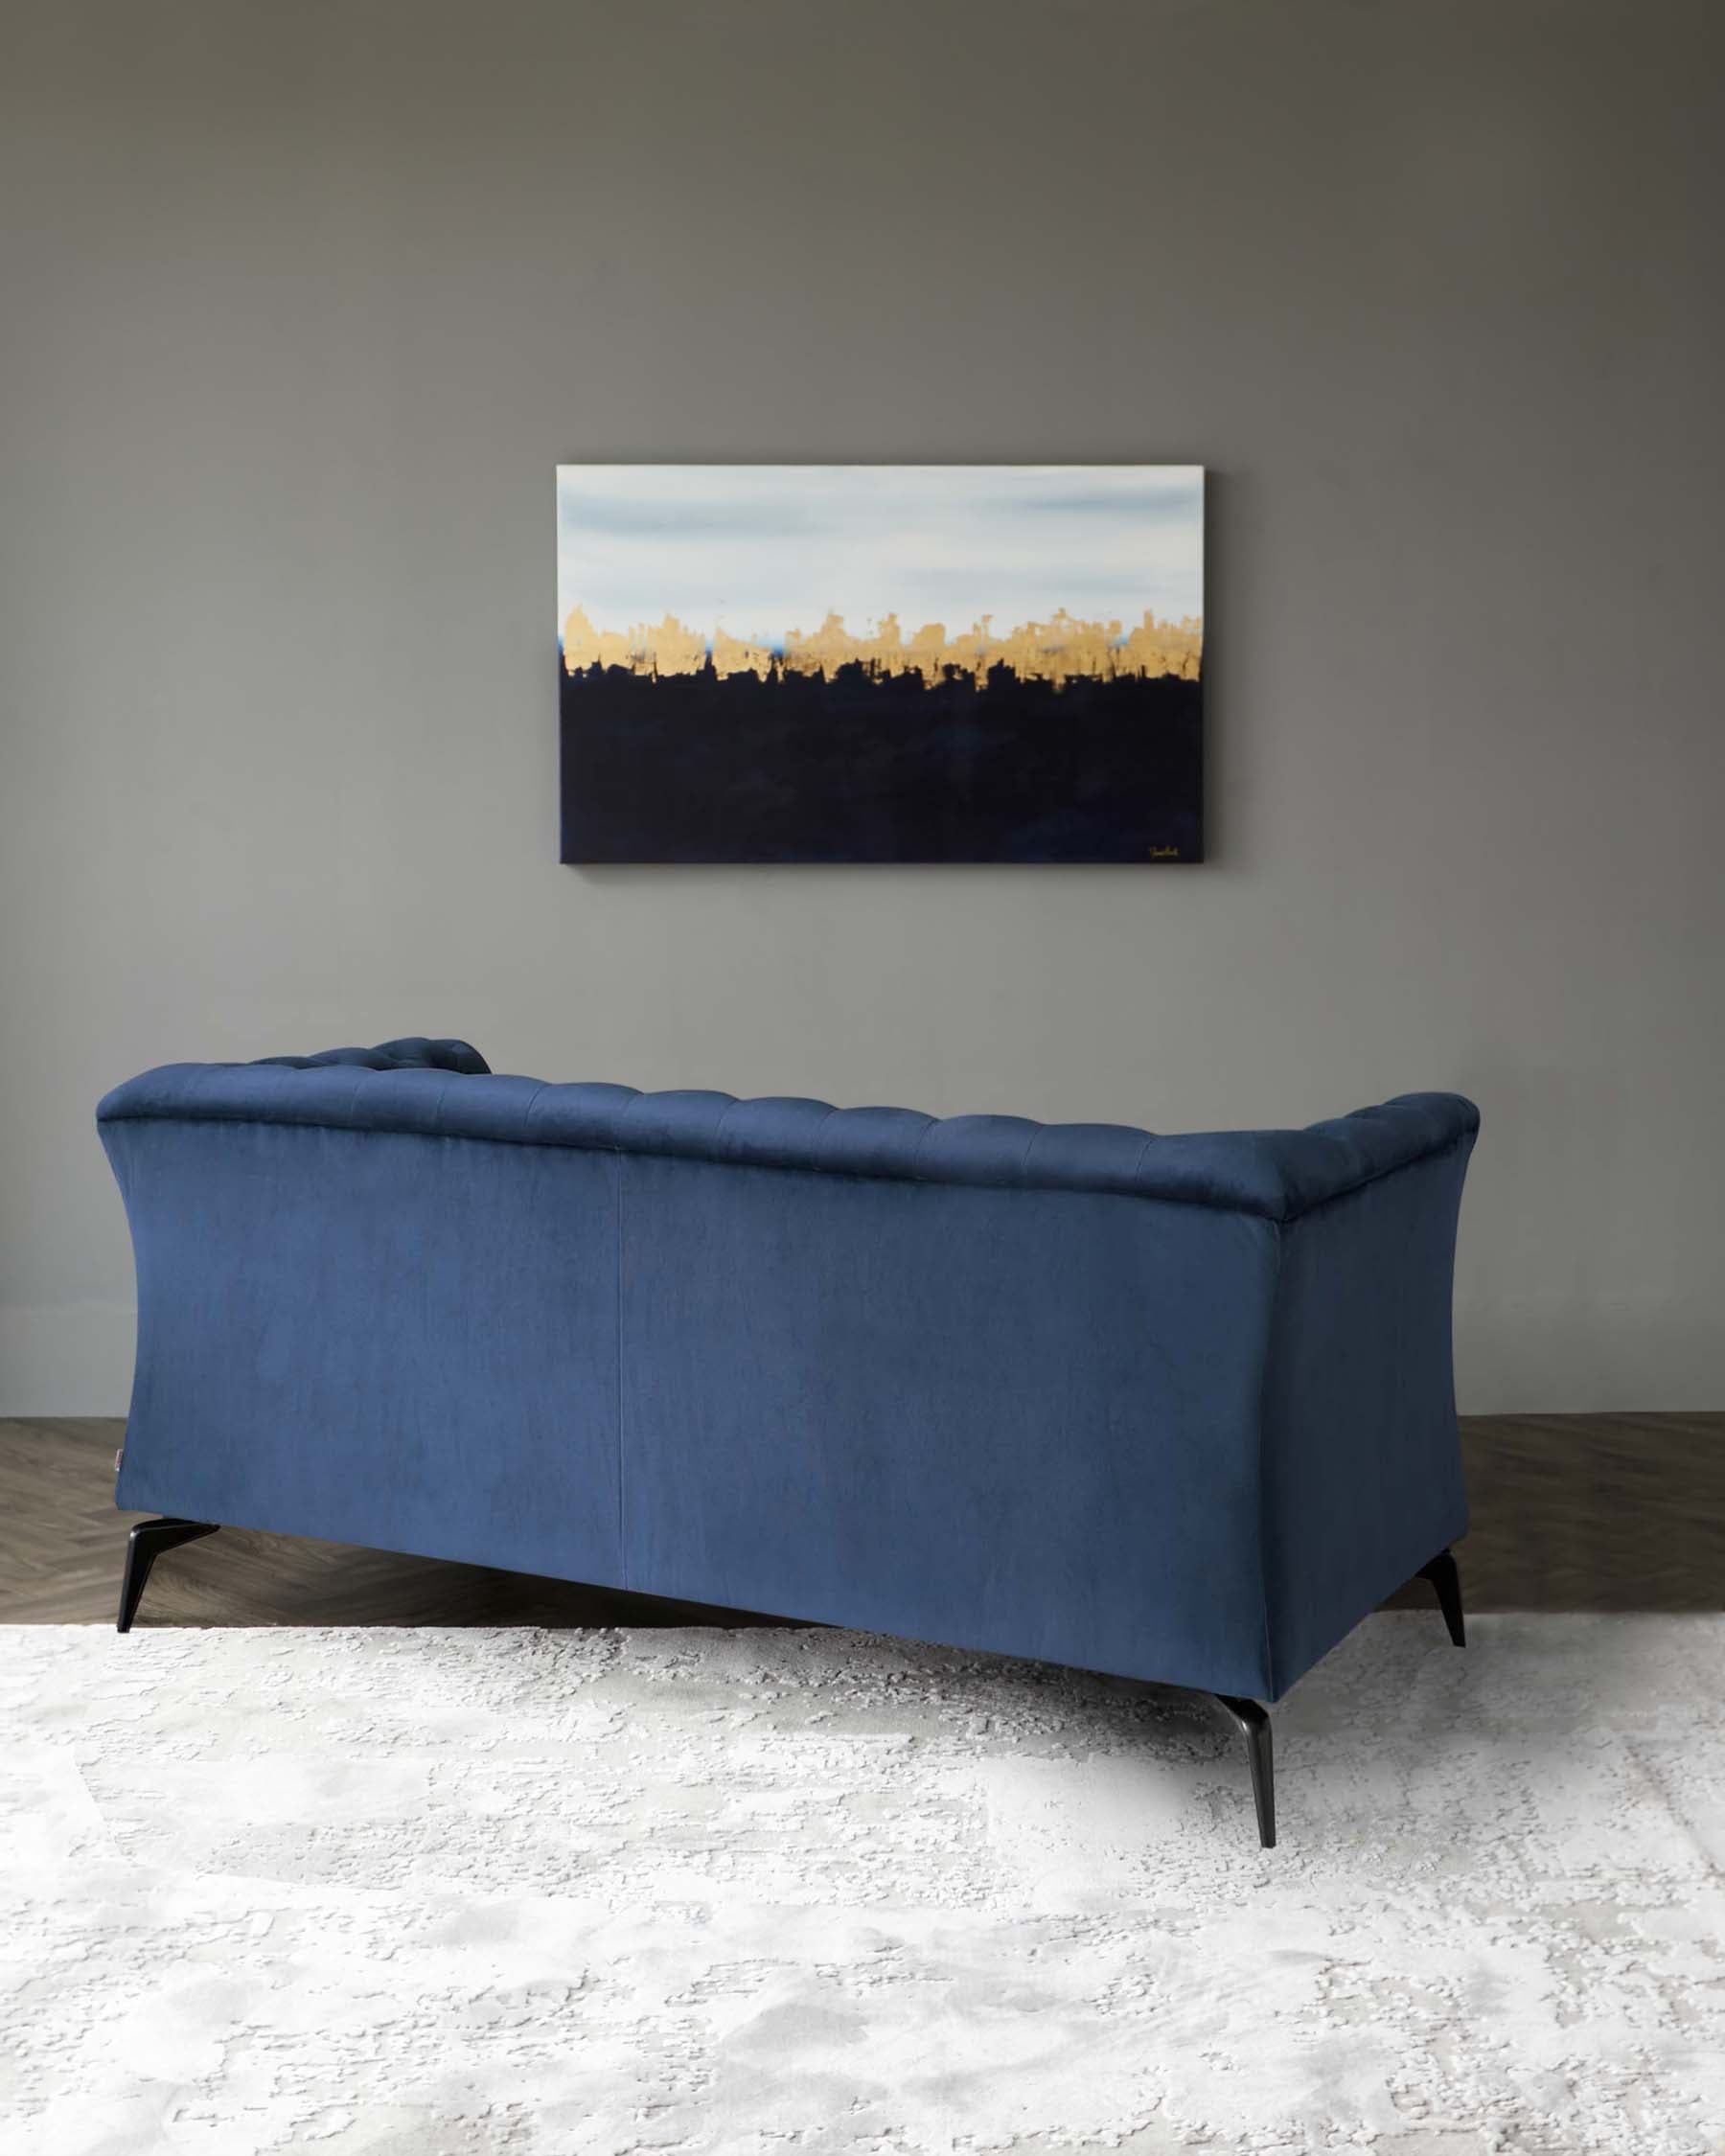 Everything You Need To Know About Velvet Sofas by Danetti